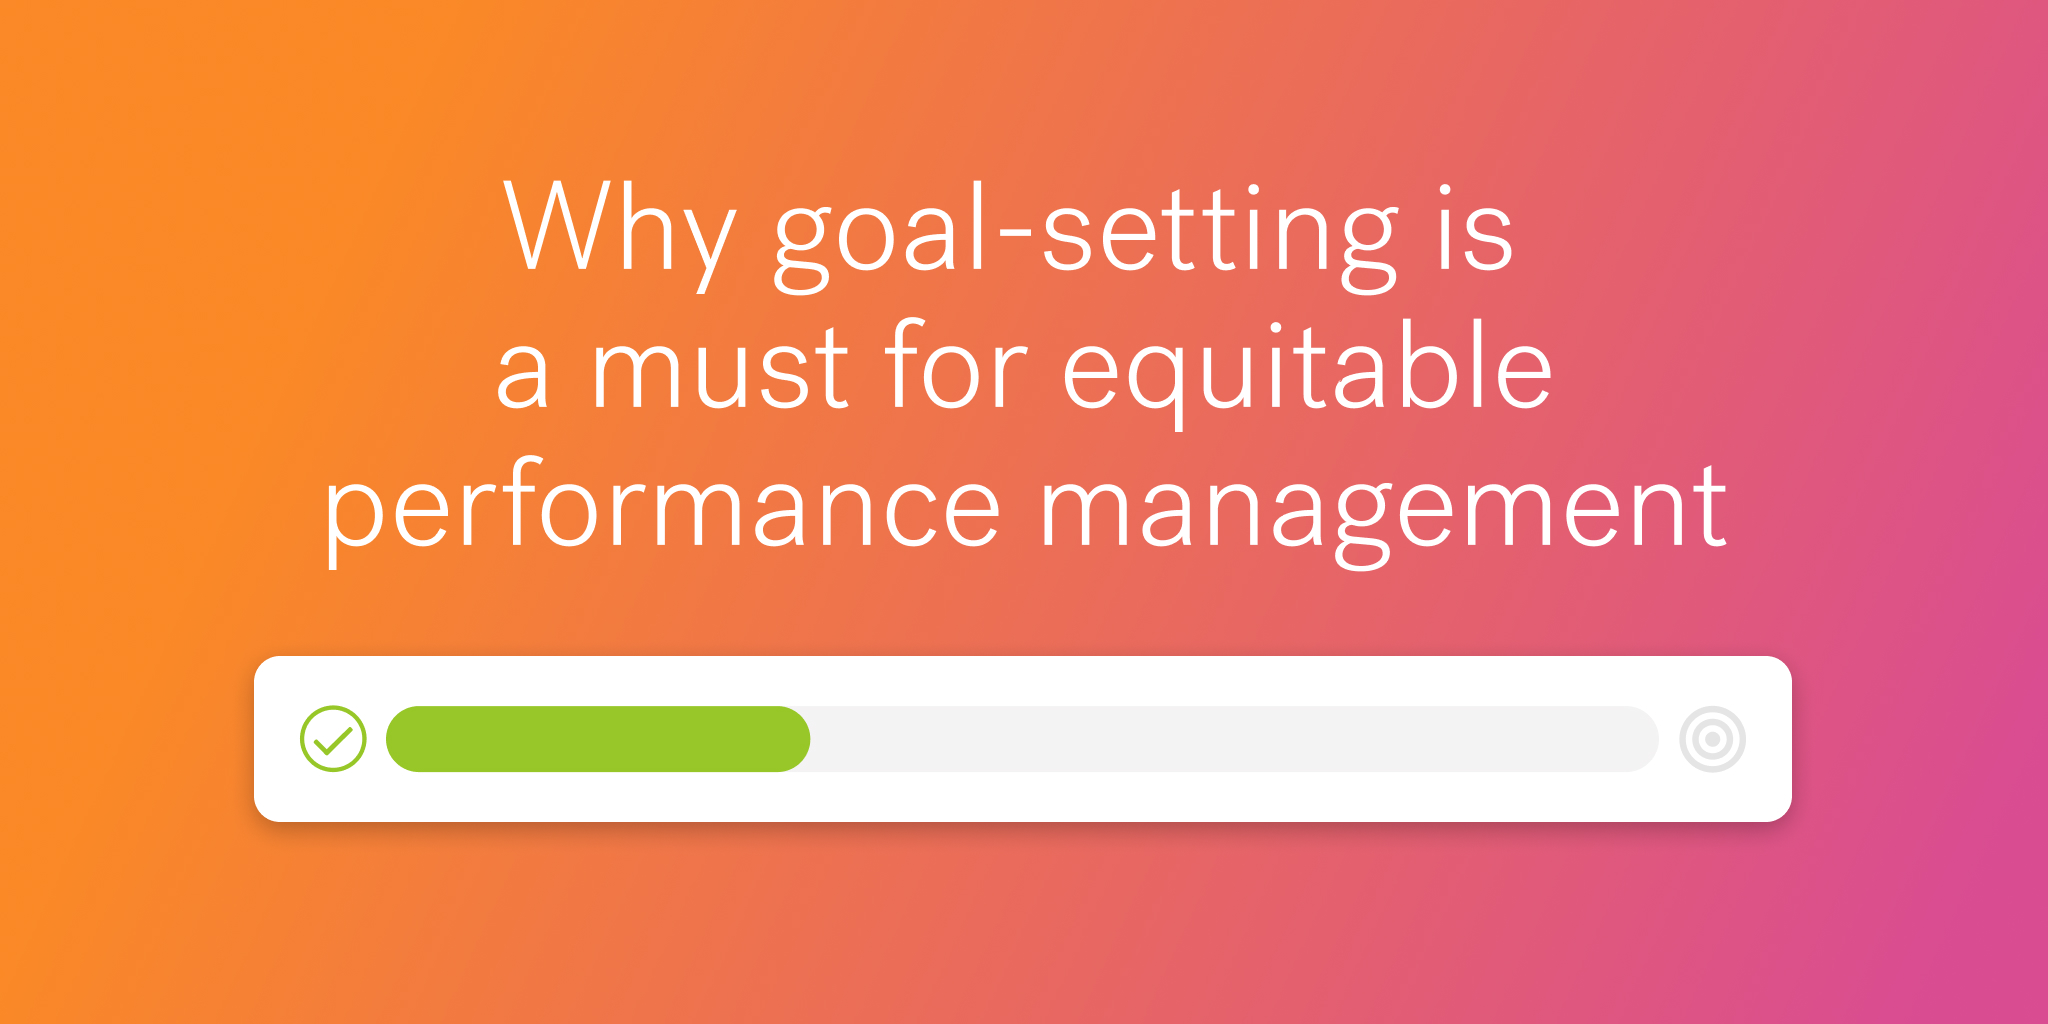 Graphic with a progress bar at the bottom with title "Why goal-setting is a must for equitable performance management"